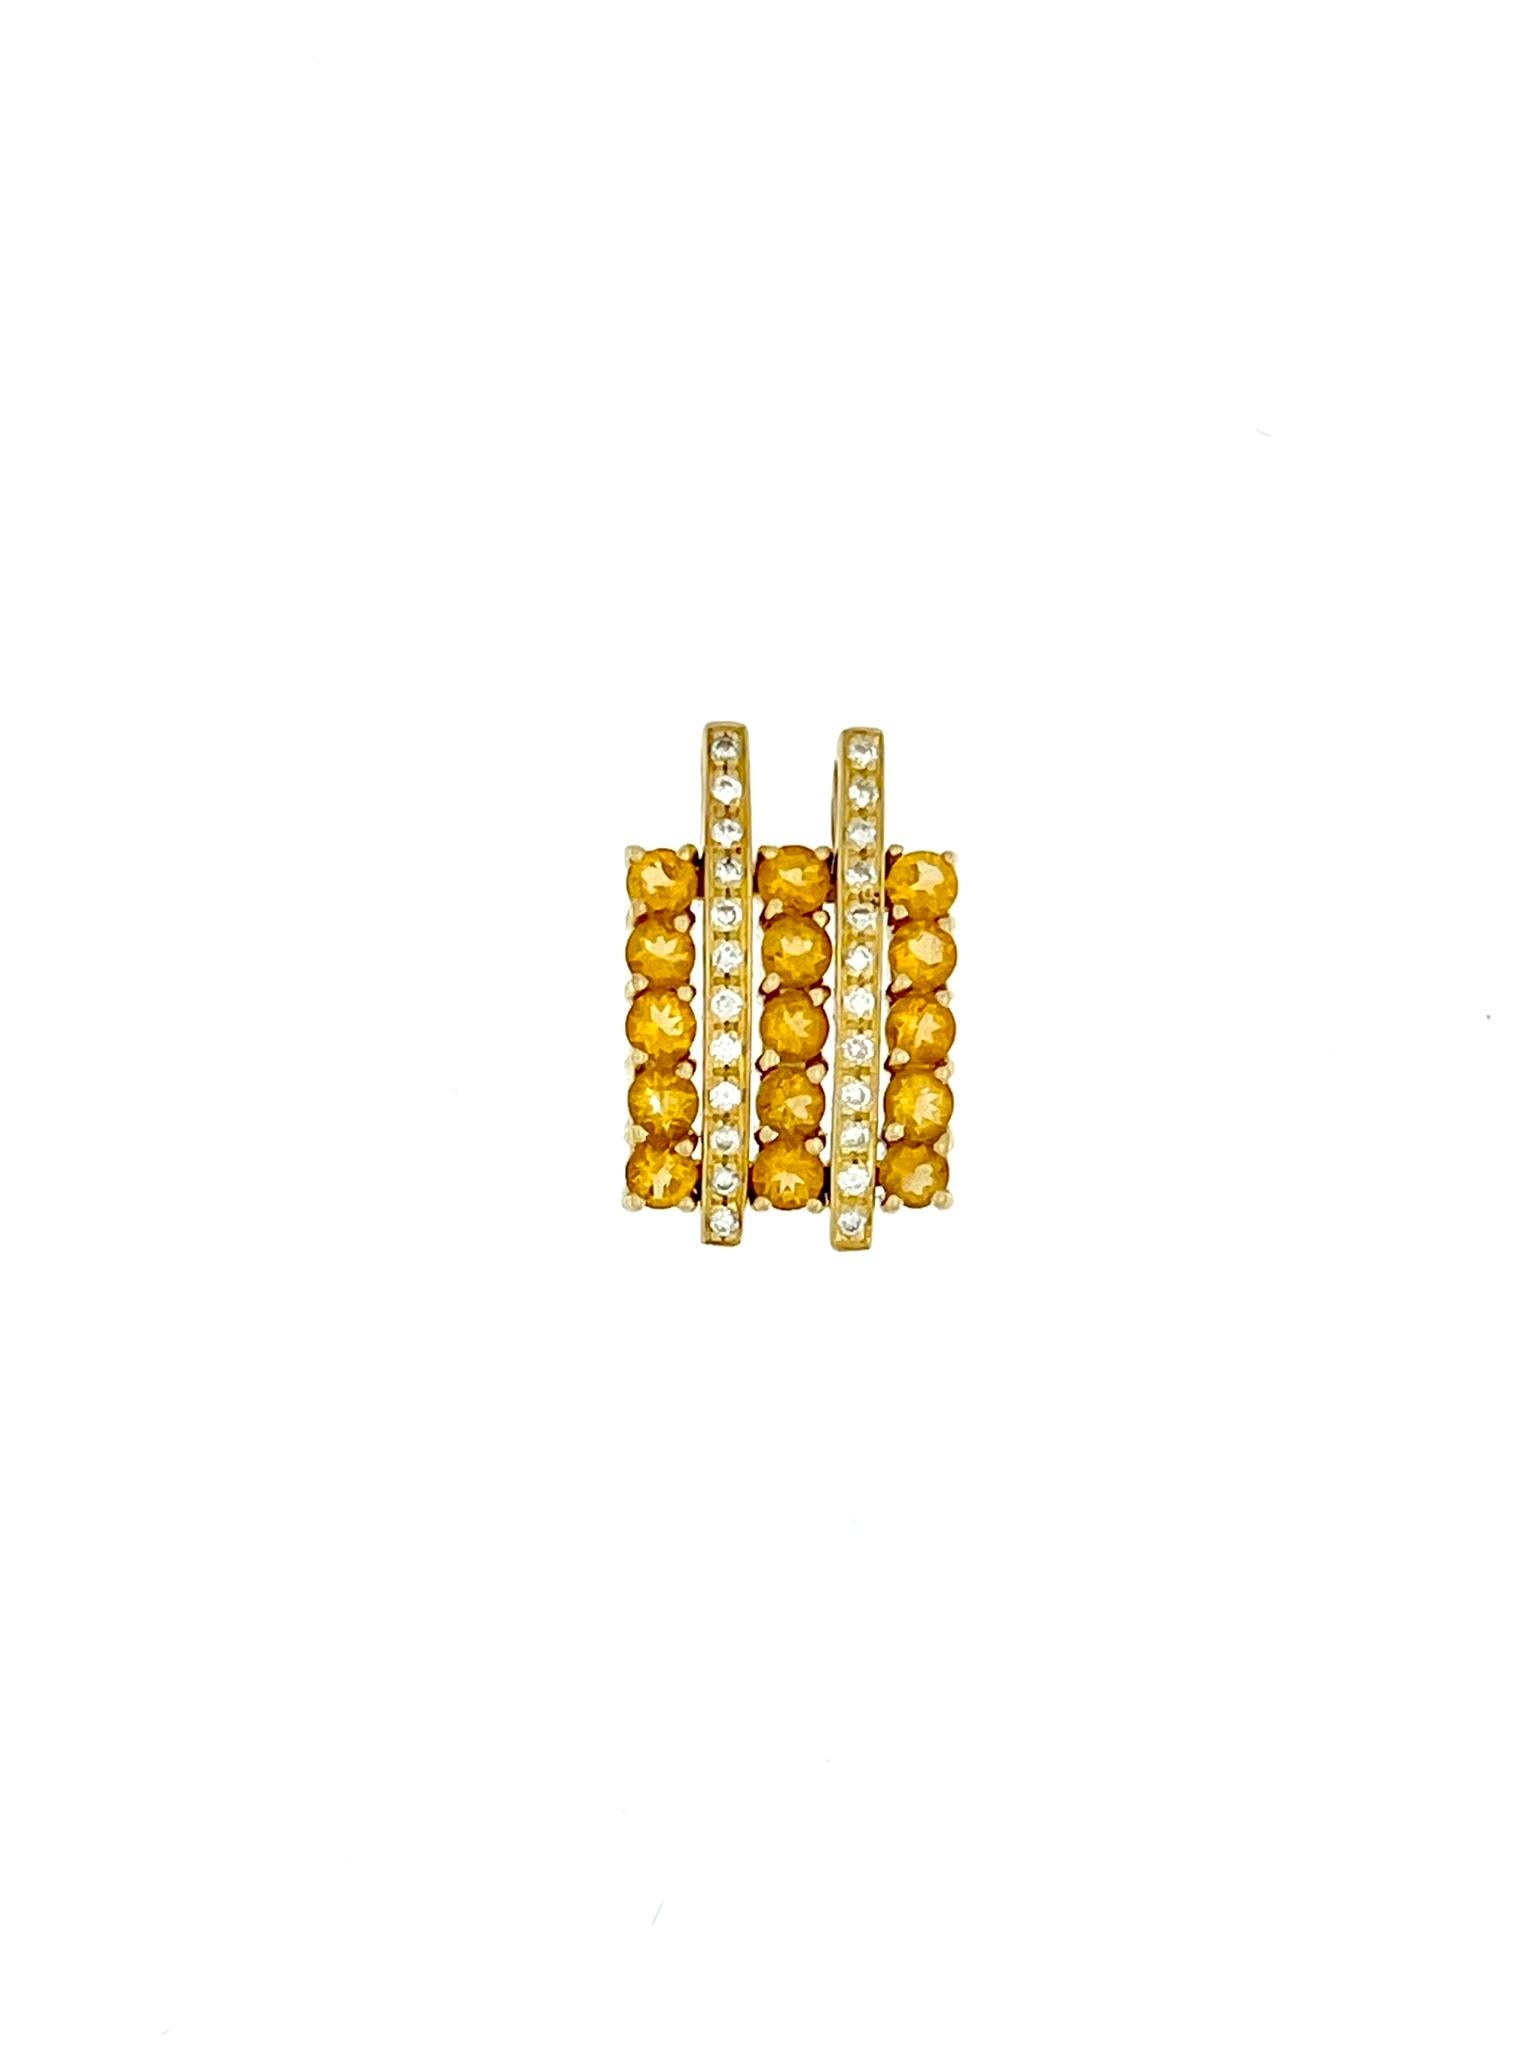 The Citrines and Diamonds Jewelry Set is an exquisite ensemble of accessories crafted from 18kt yellow gold and adorned with the sparkling beauty of citrine gemstones and diamonds. This set includes a pendant and a pair of earrings, each